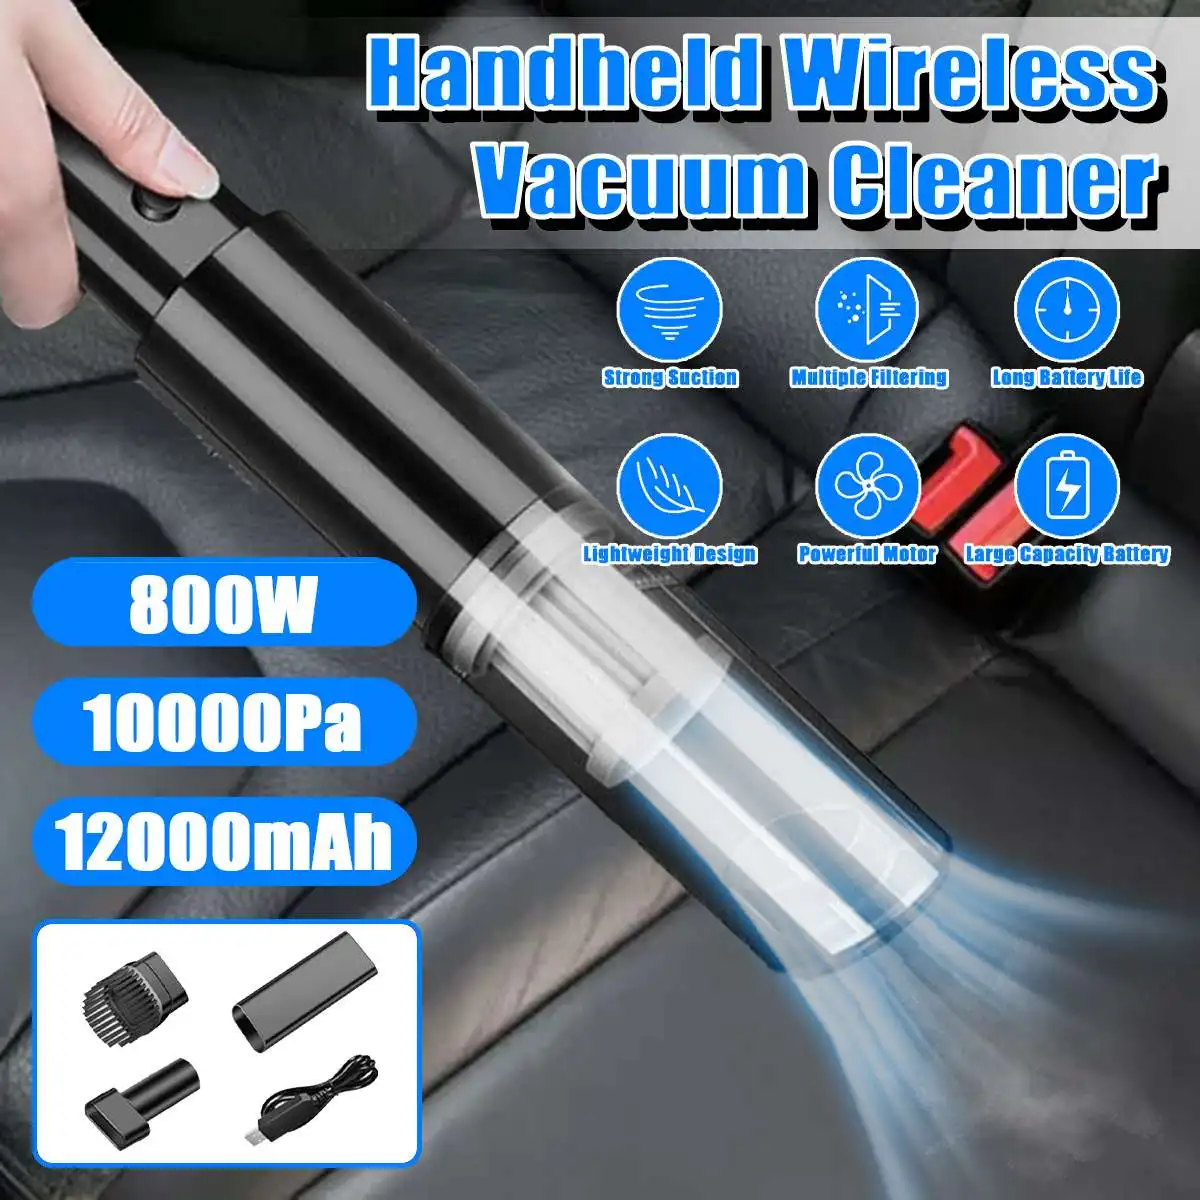 

10000Pa 12000mAh Handheld Wireless Car Vacuum Cleaner Powerful Cyclone Suction Rechargeable Wet Dry Home Car Vacuum Cleaner